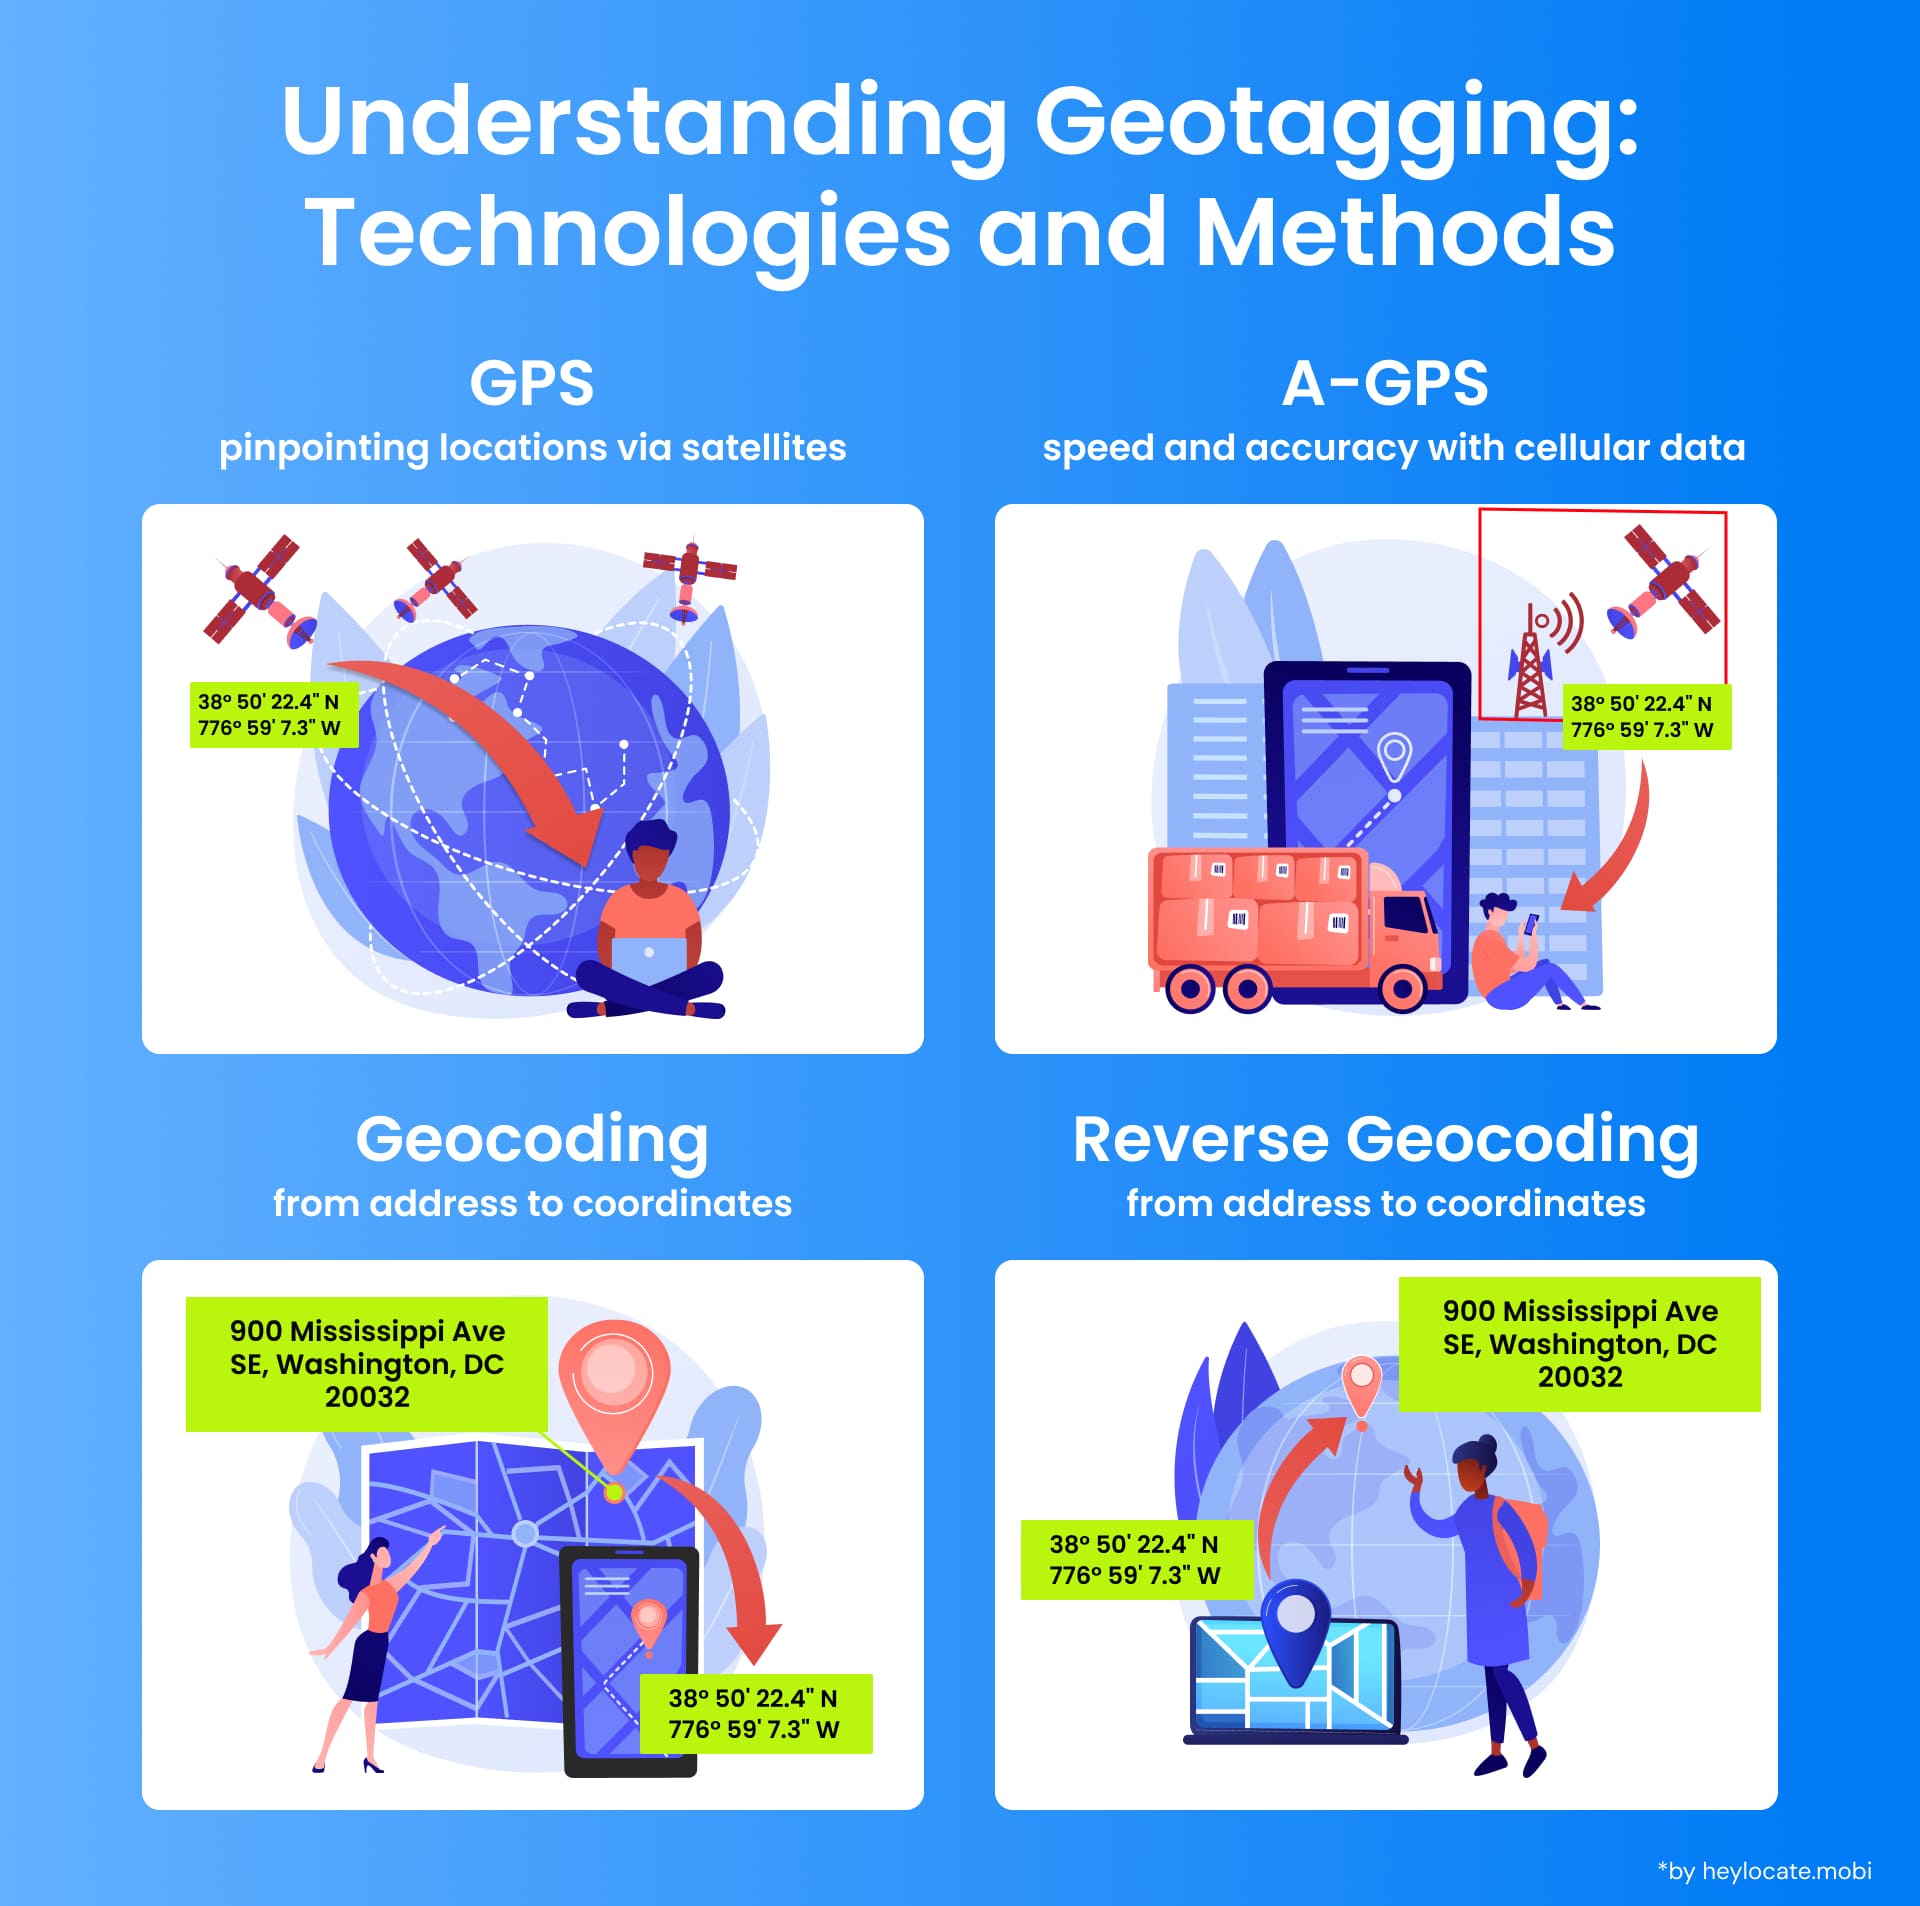 Infographic showing GPS and A-GPS technologies, geocoding, and reverse geocoding processes with visual examples.